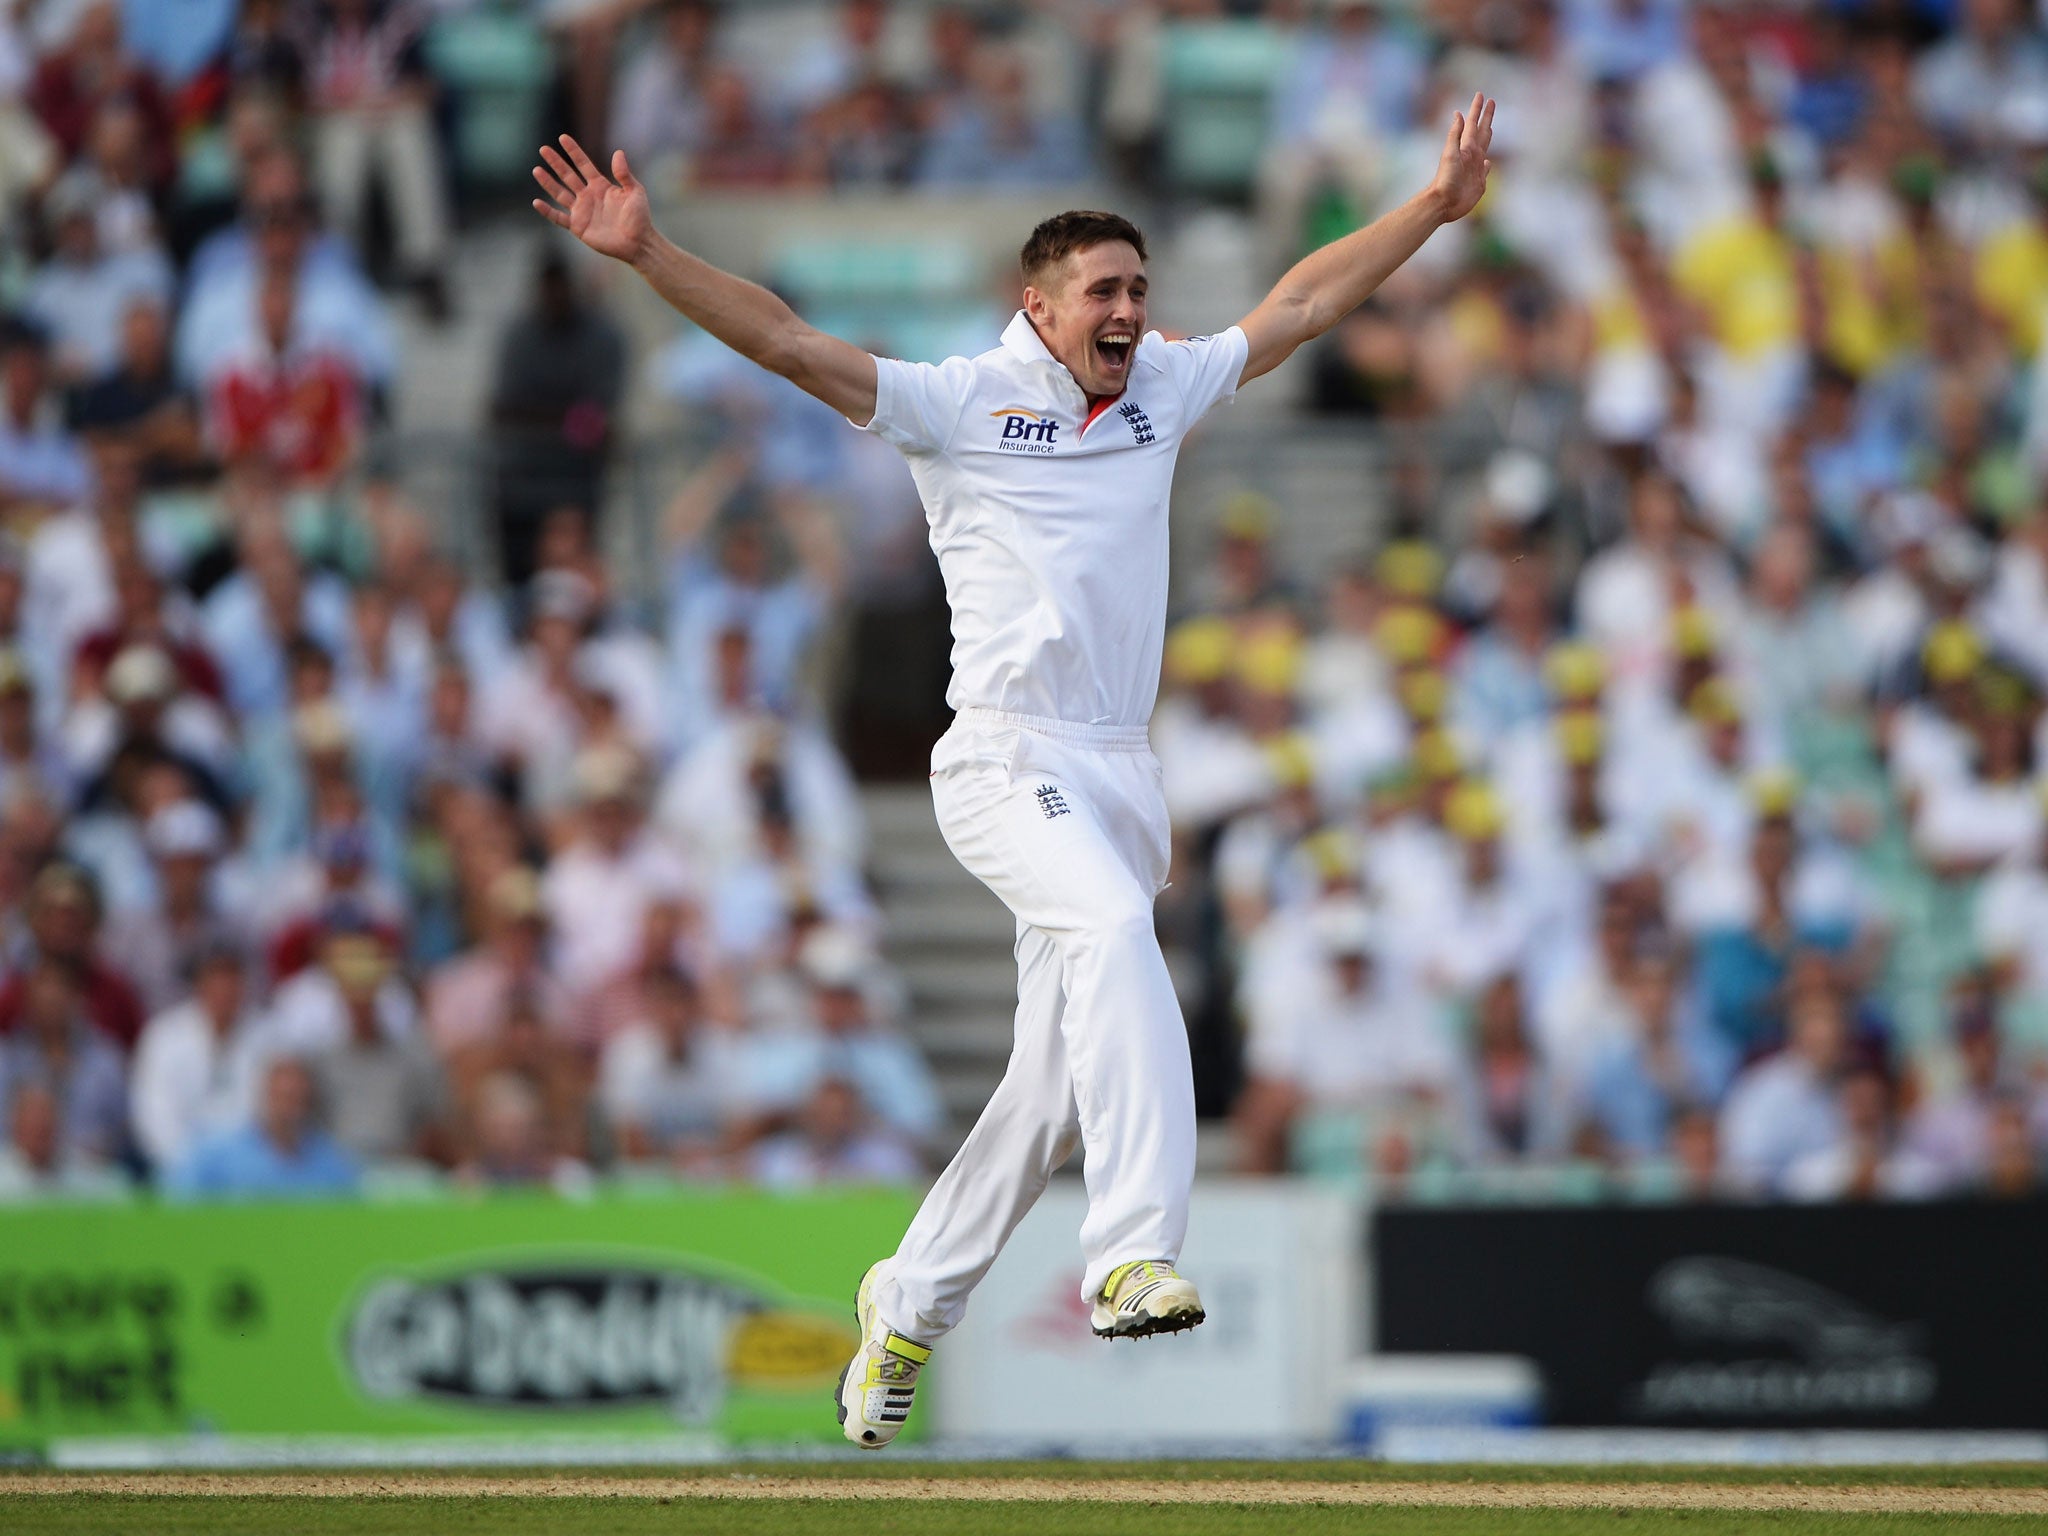 Chris Woakes celebrates the wicket of Shane Watson but the decision was overturned after review during day one of the 5th Investec Ashes Test match